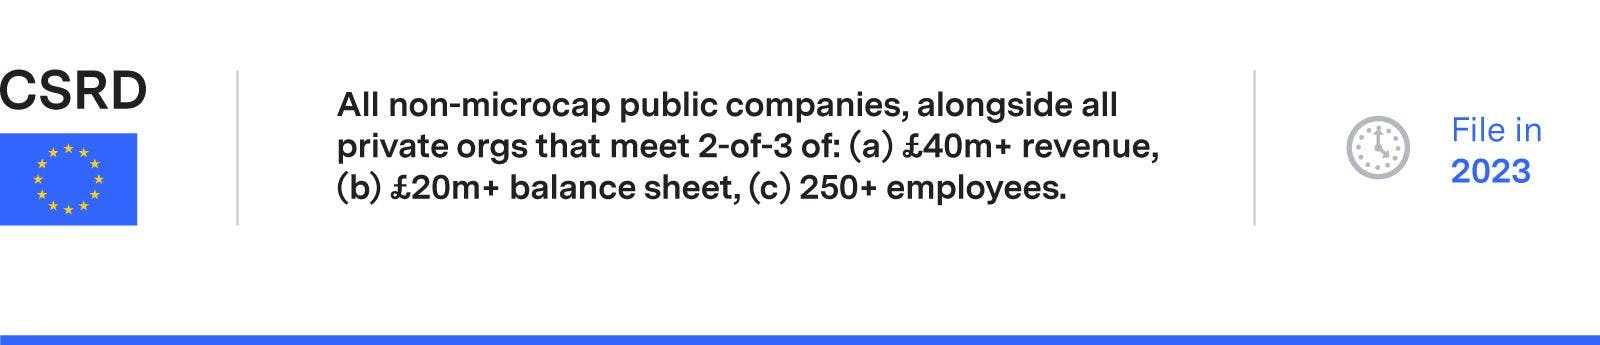 CSRD requirement: All non-microcap public companies, alongside all private orgs that meet 2-of-3 of: (a) £40m+ revenue, (b) £20m+ balance sheet, (c) 250+ employees. File in 2023.